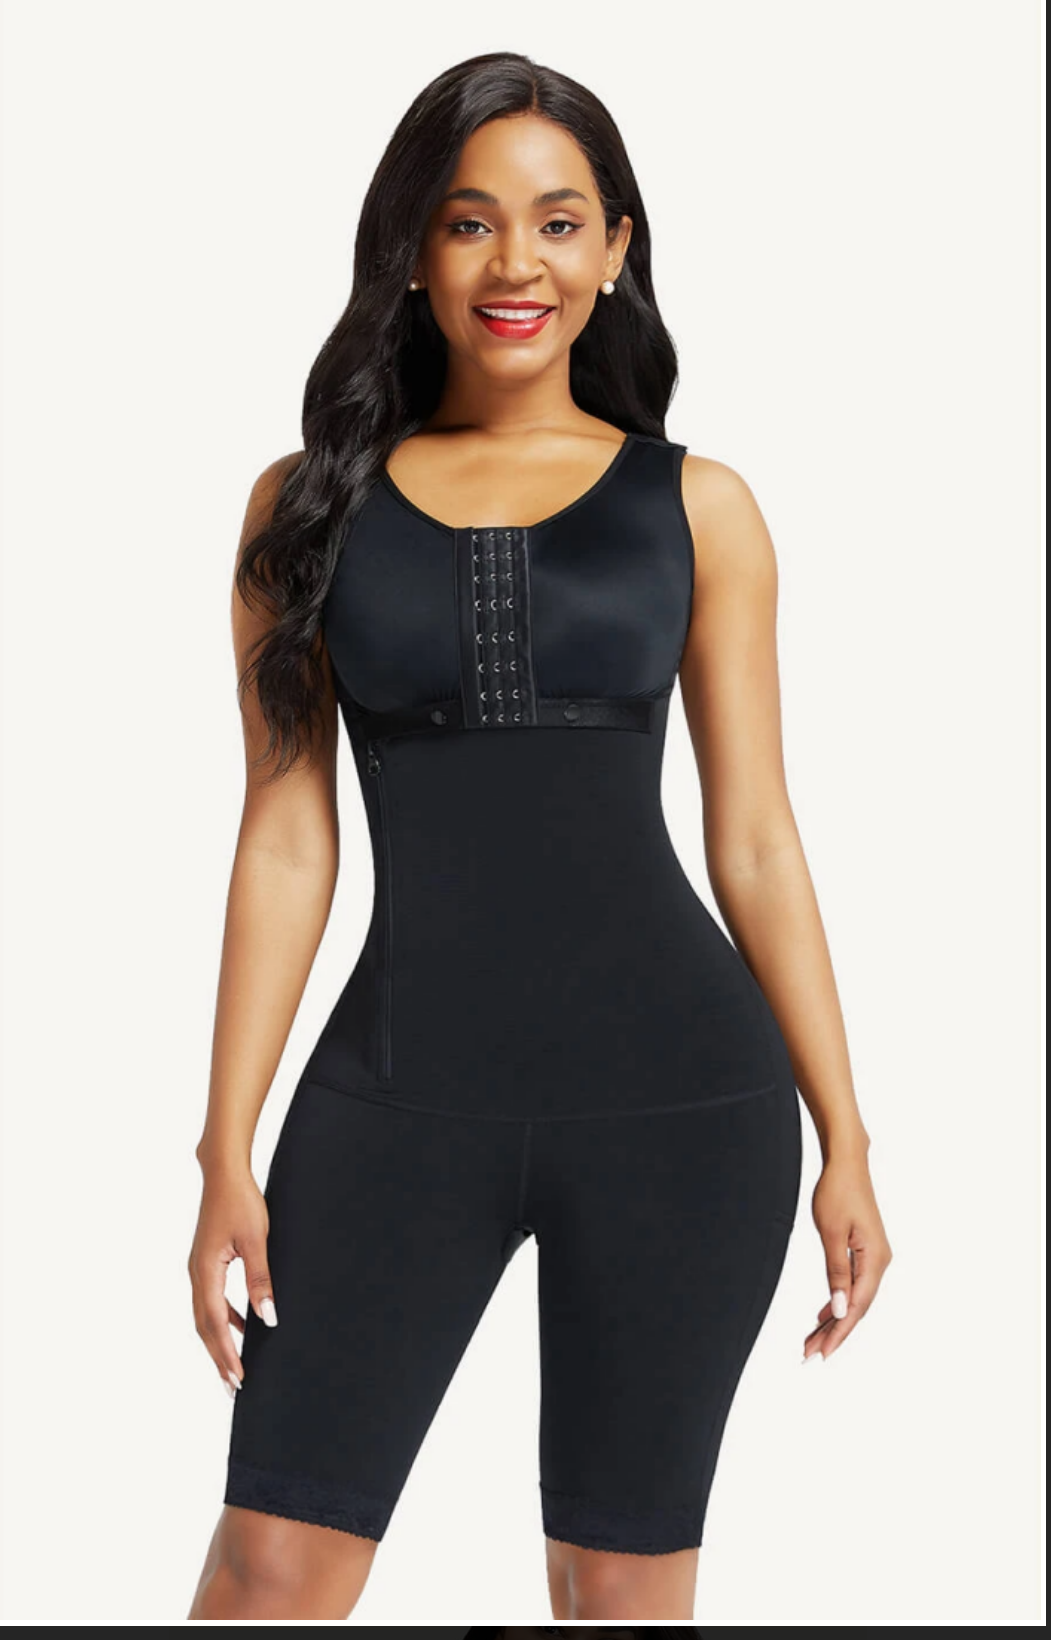 What Are The Best Shapewear For Tummy Control? | Tessy Onyia's Blog